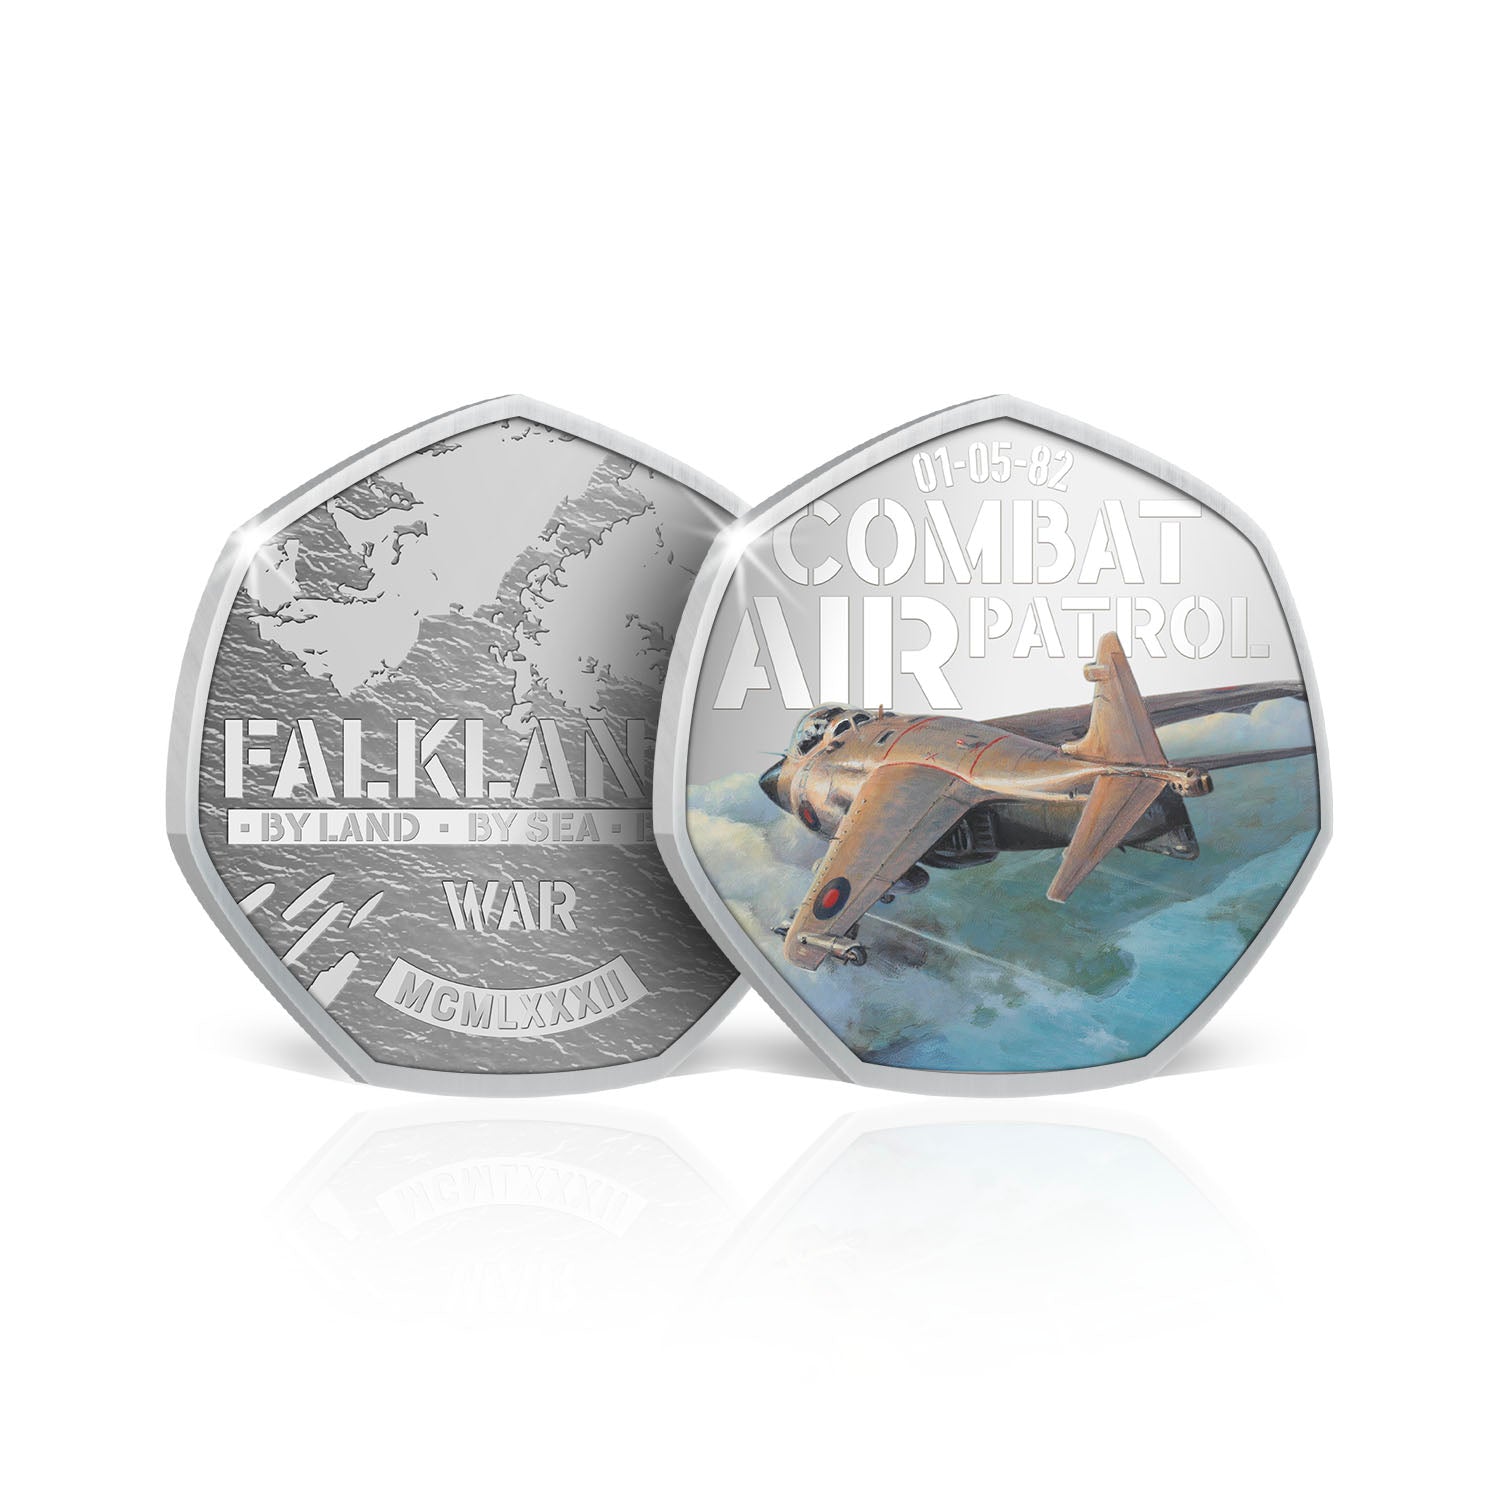 Combat Air Patrol in Coin Holder